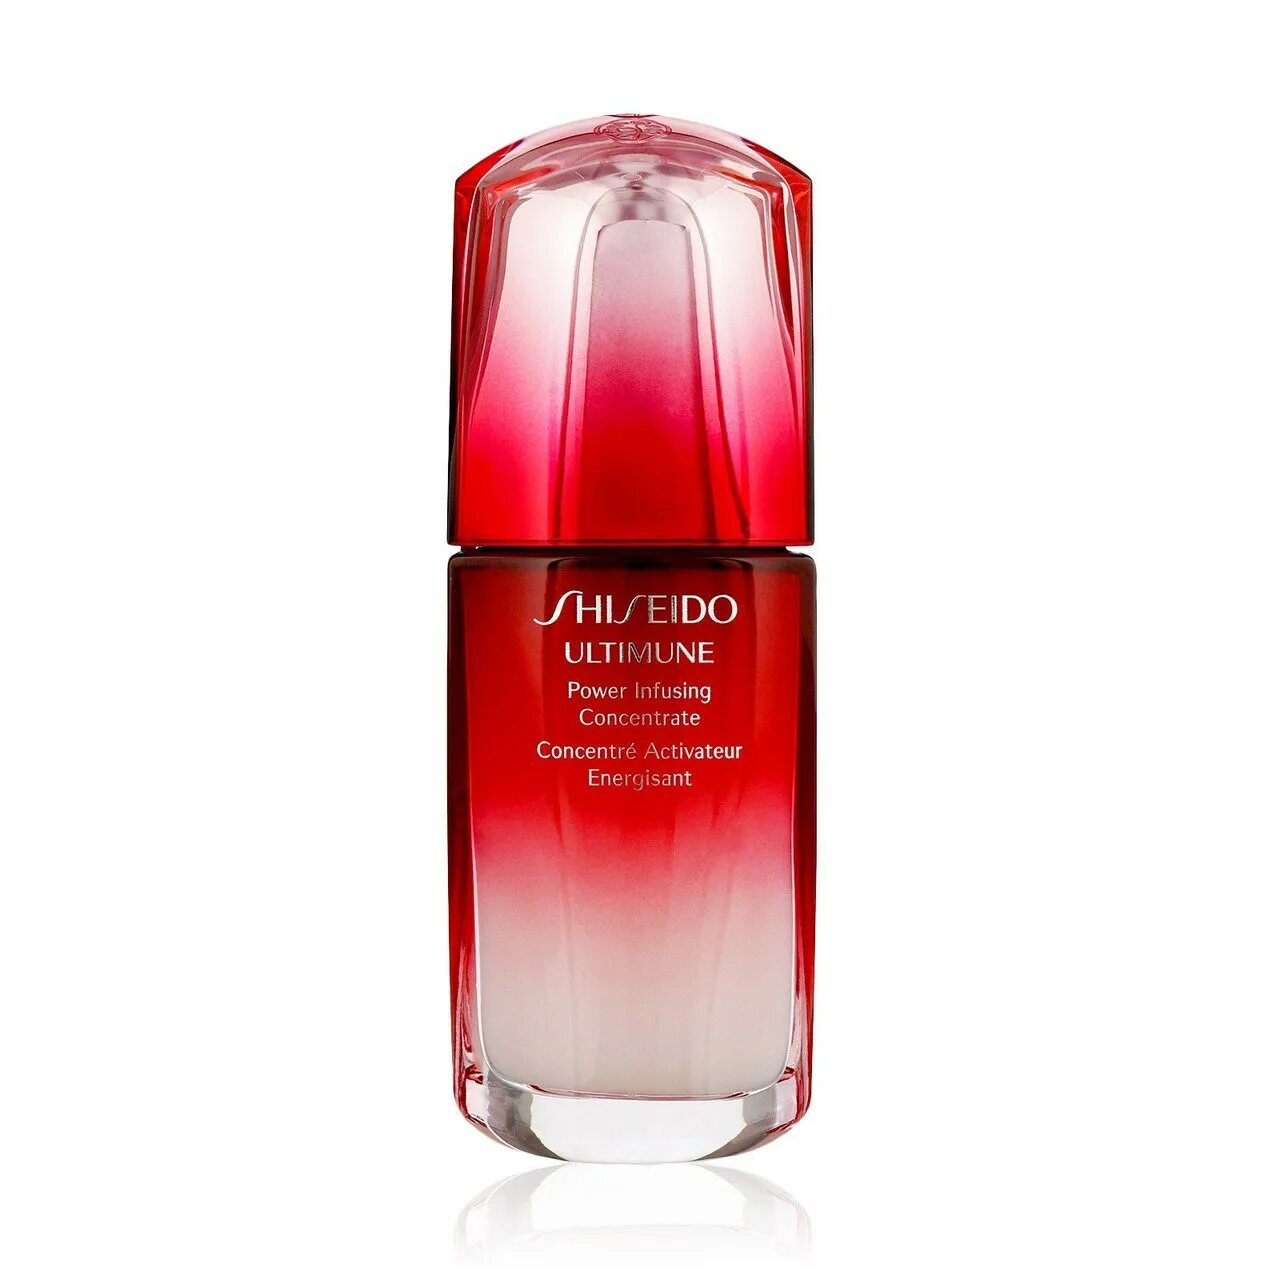 Shiseido Ultimune Power infusing Concentrate. Ultimune концентрат шисейдо. Ultimune концентрат шисейдо Power infusing. Концентрат Shiseido Ultimune Power infusing Concentrate.